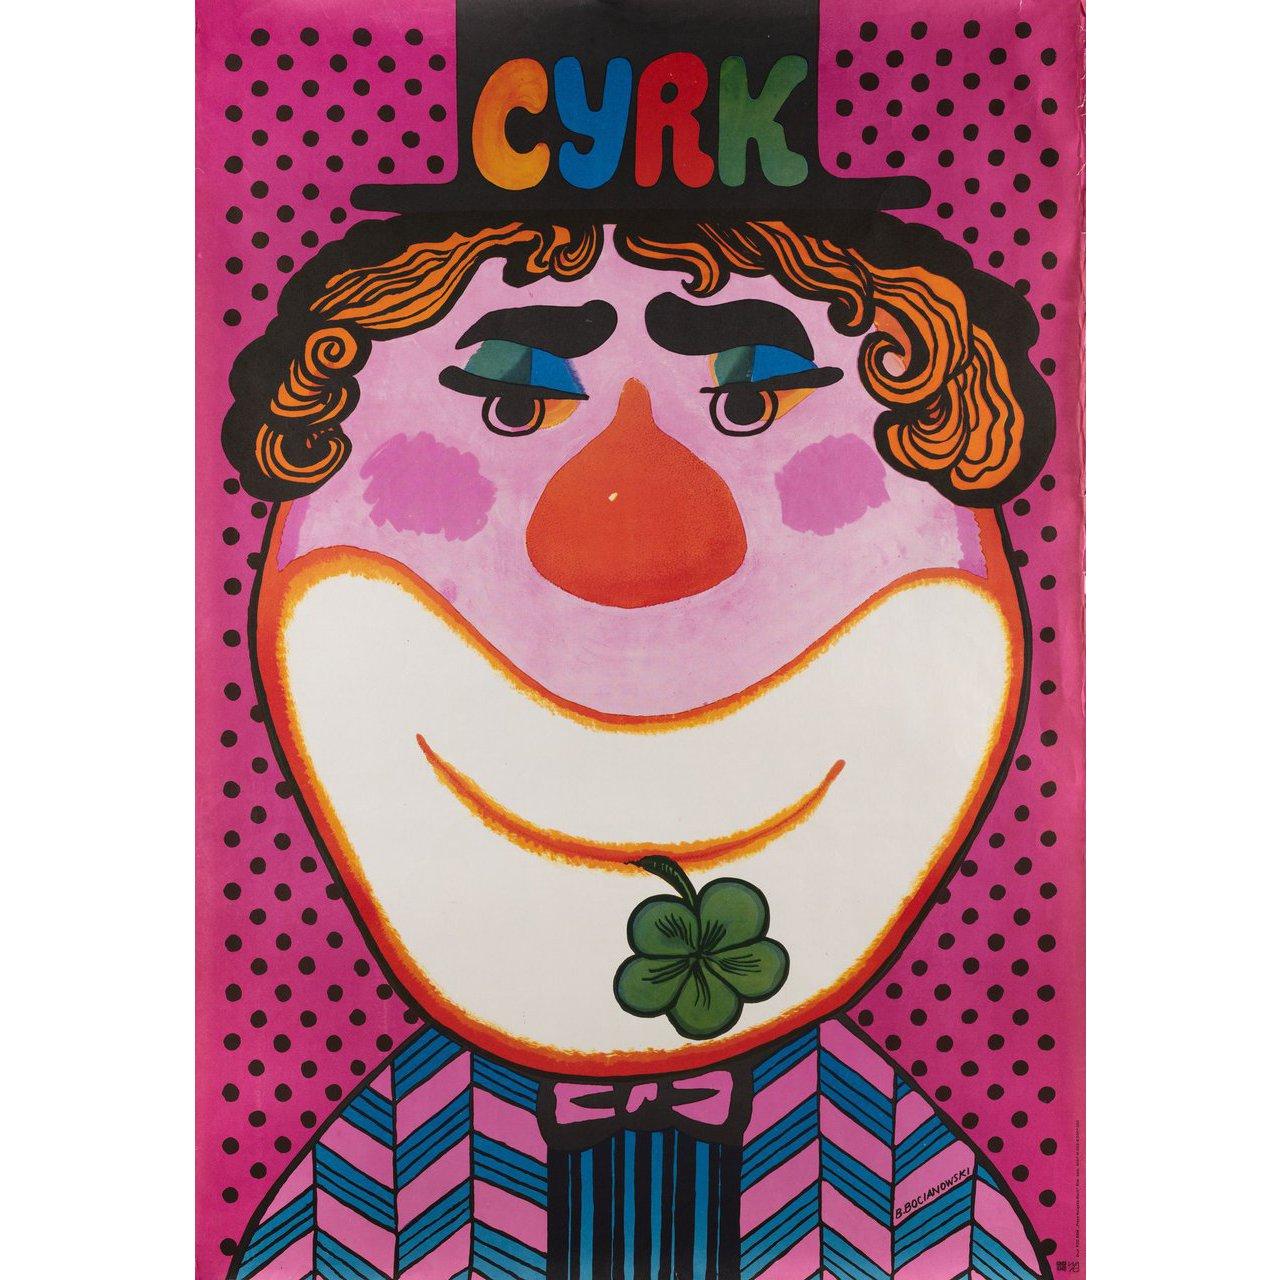 Original 1973 Polish B1 poster by Bohdan Bocianowski for Cyrk (Circus) (1973). Very Good-Fine condition, rolled. Please note: the size is stated in inches and the actual size can vary by an inch or more.
